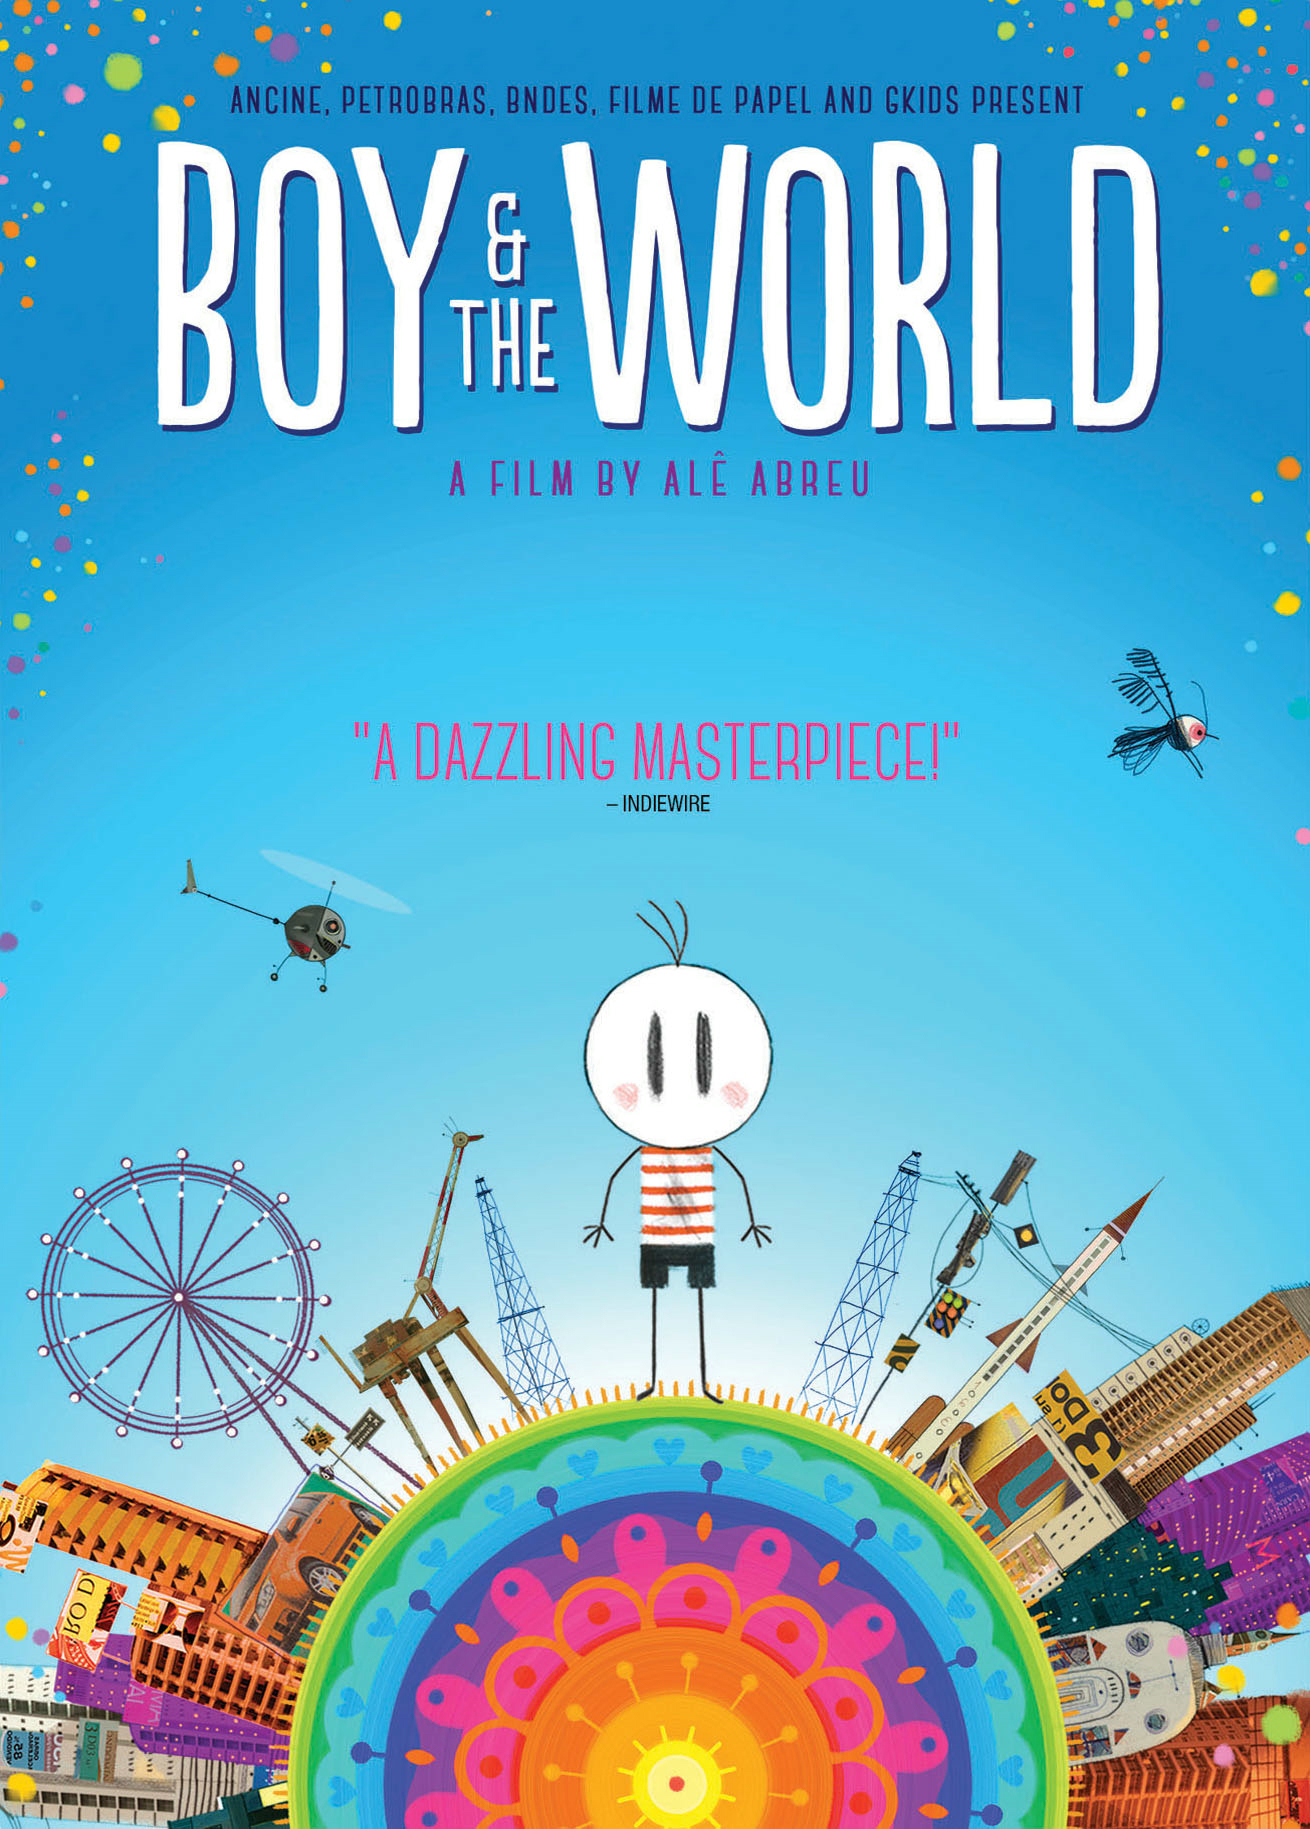 Boy And The World - DVD [ 2015 ]  - Foreign Movies On DVD - Movies On GRUV